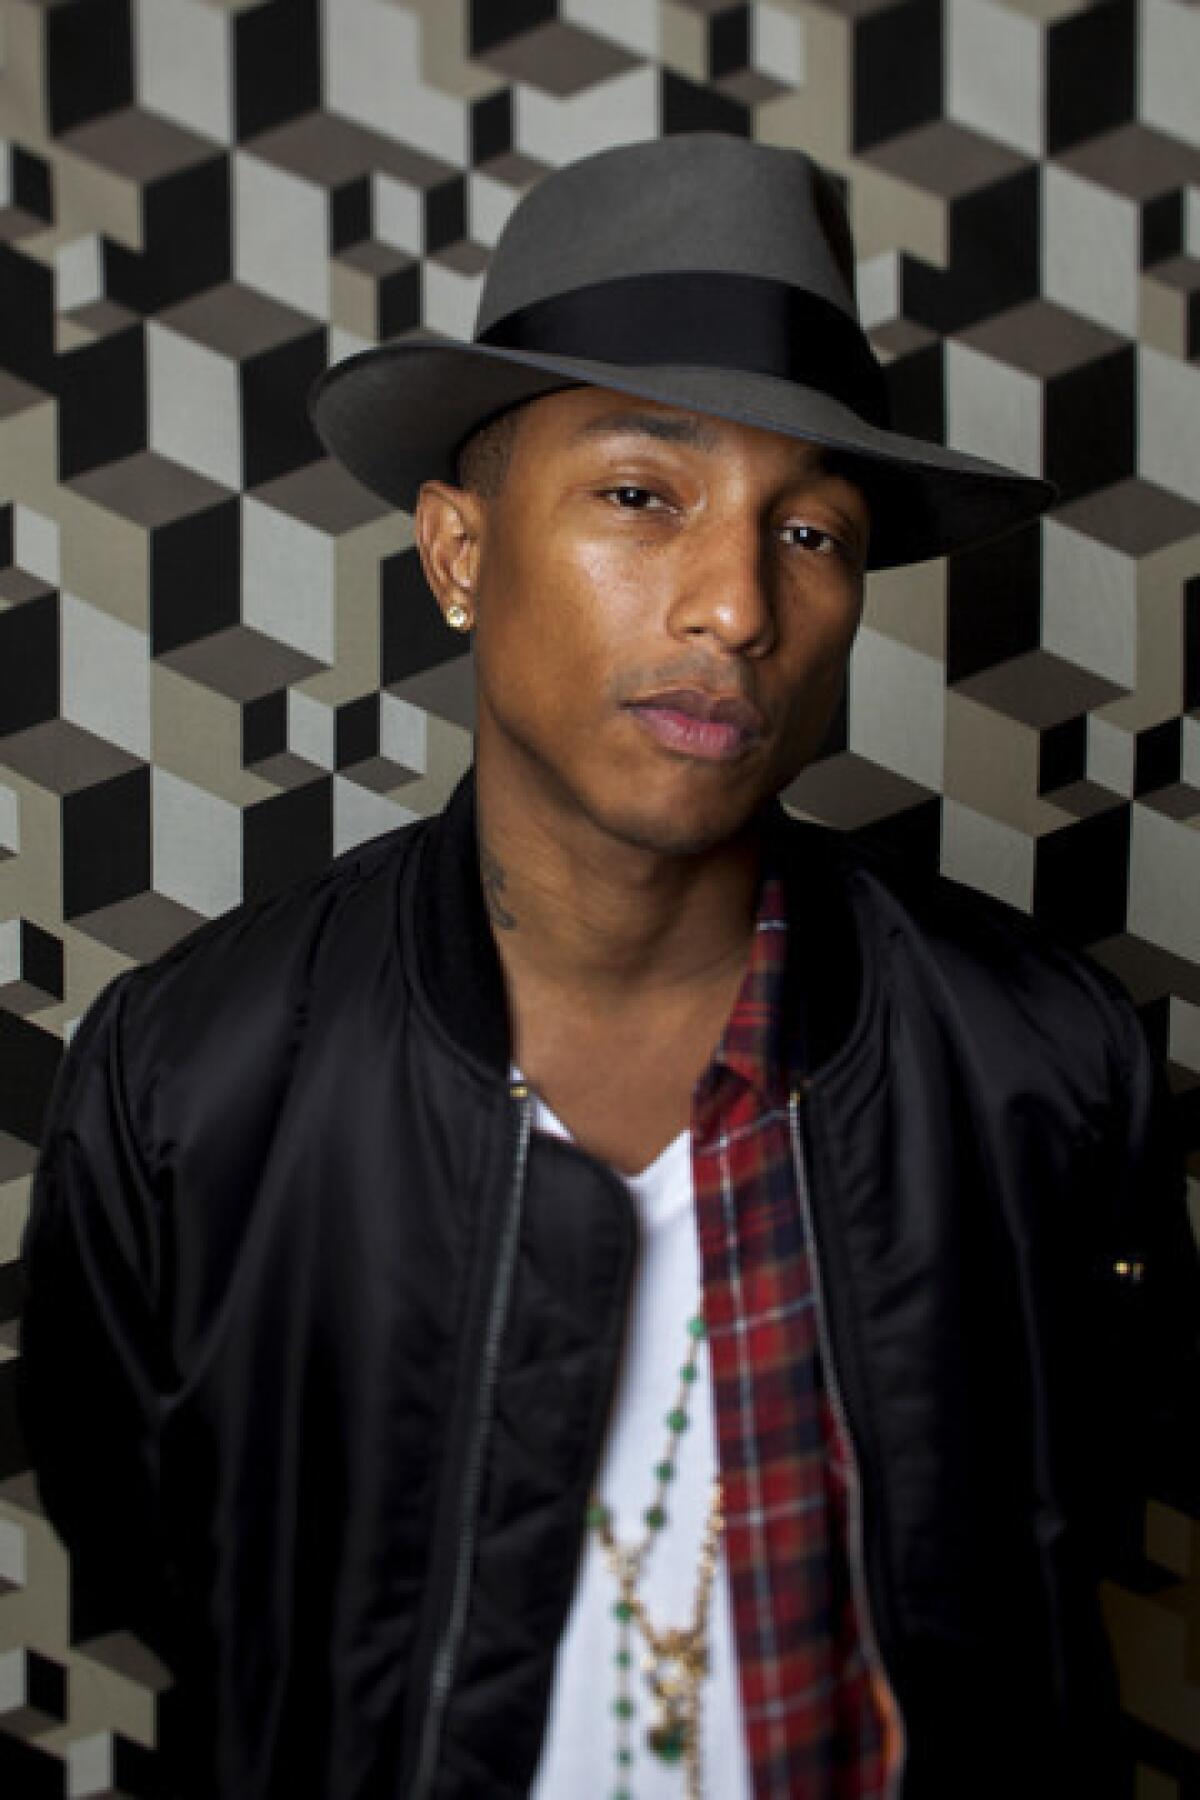 Singer-songwriter and music producer Pharell Williams, who produced the song "Happy" for the movie "Despicable Me 2," will perform the song at the Oscars next month.